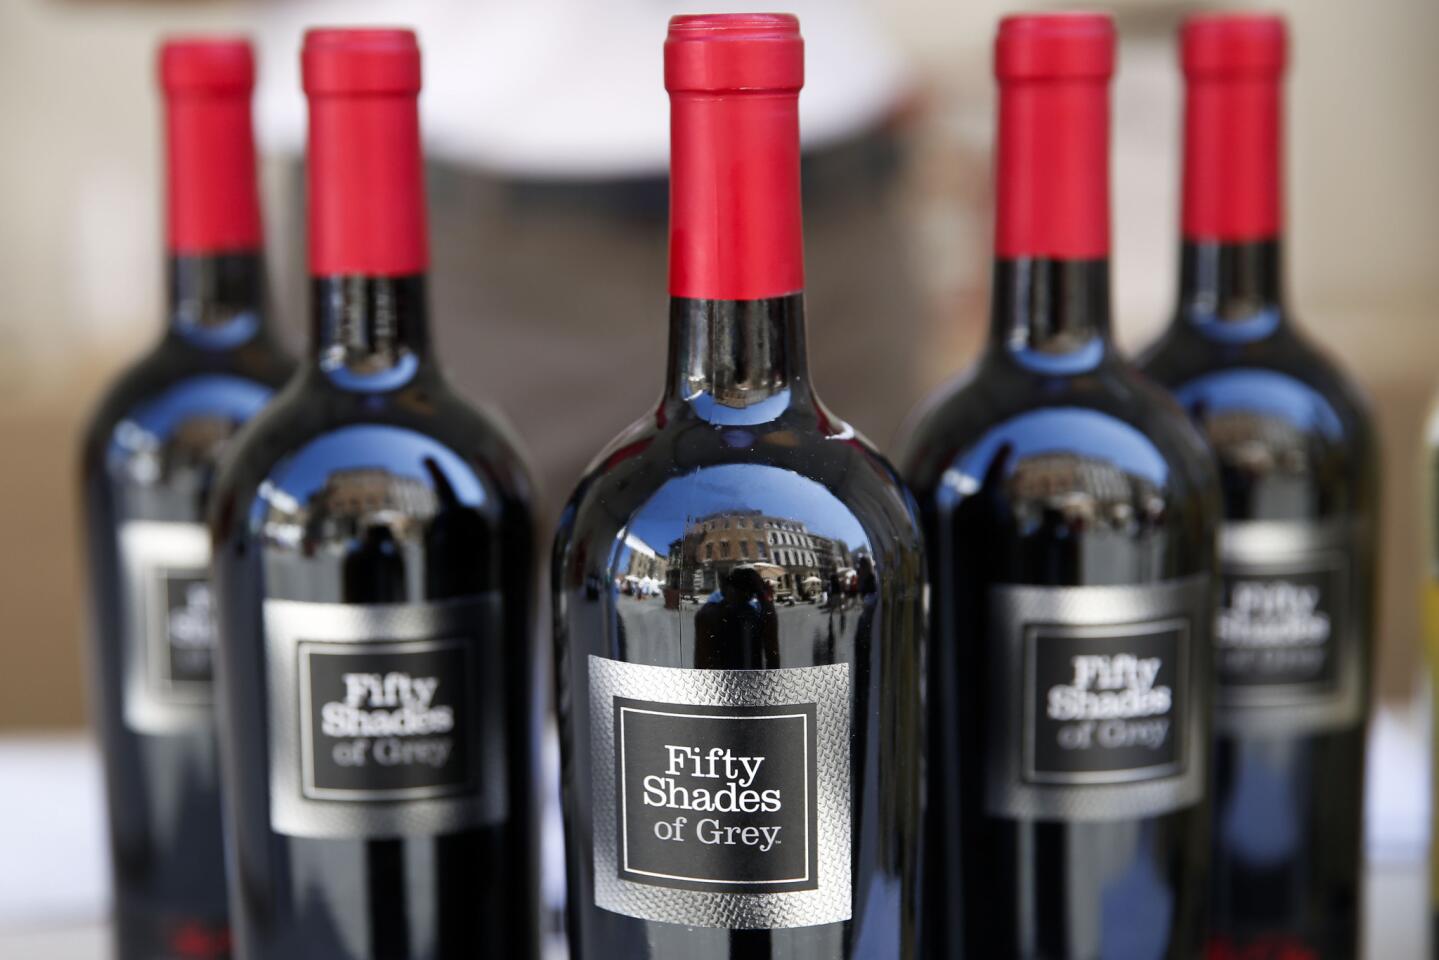 Fifty Shades of Grey red wine